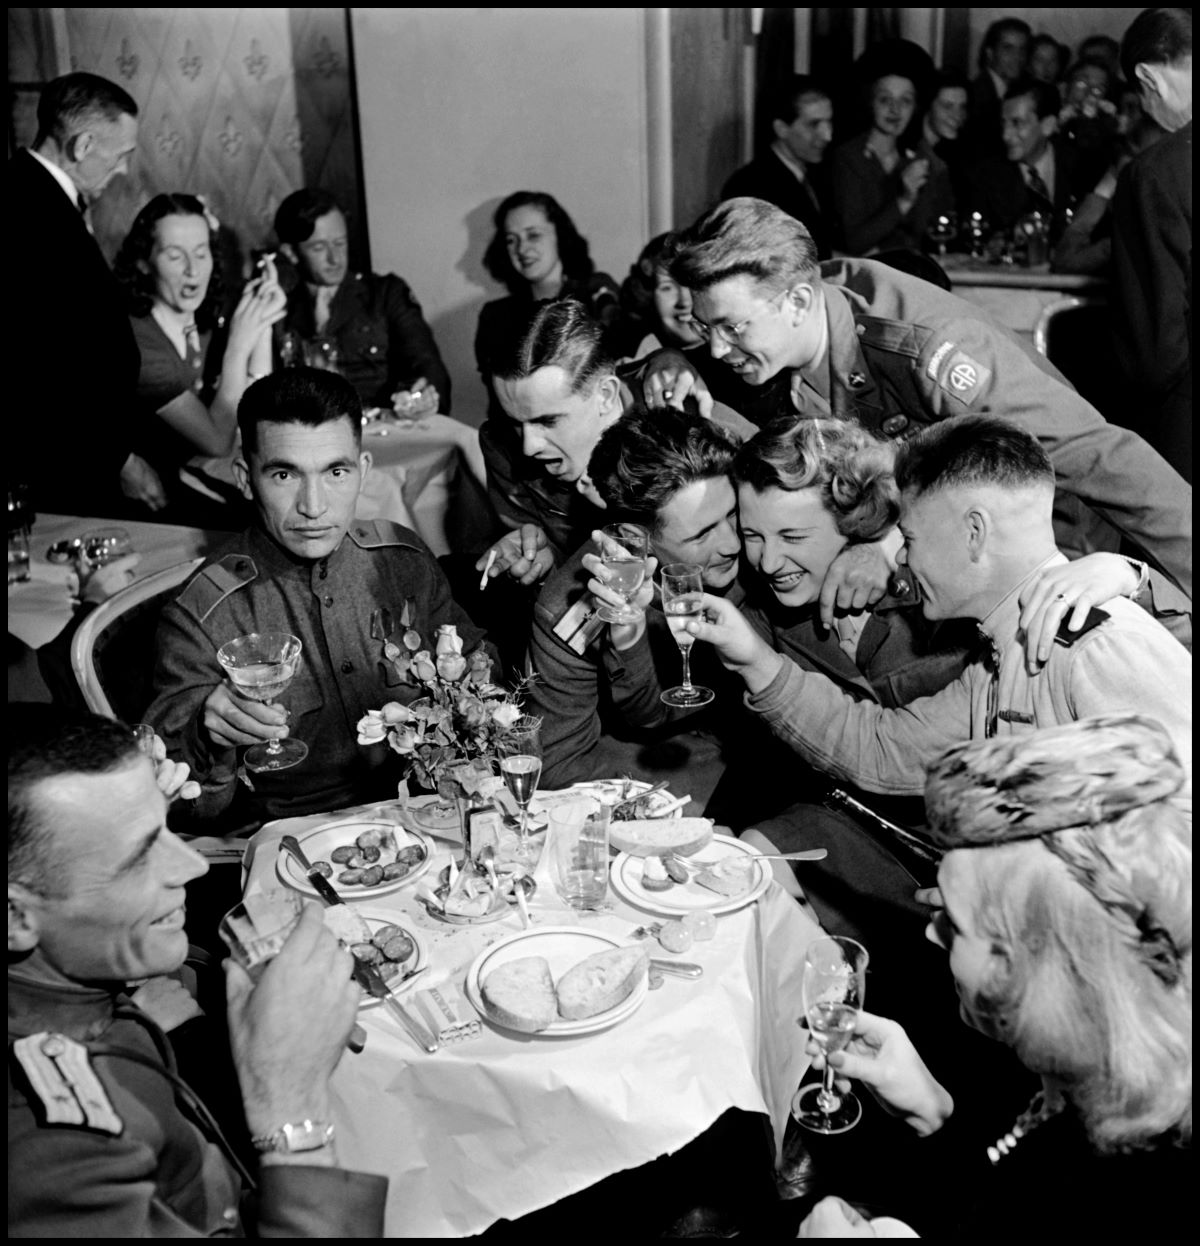 Russian and American soldiers, part of the Allied occupation forces, at a multi-national party, Berlin, Germany, 1945